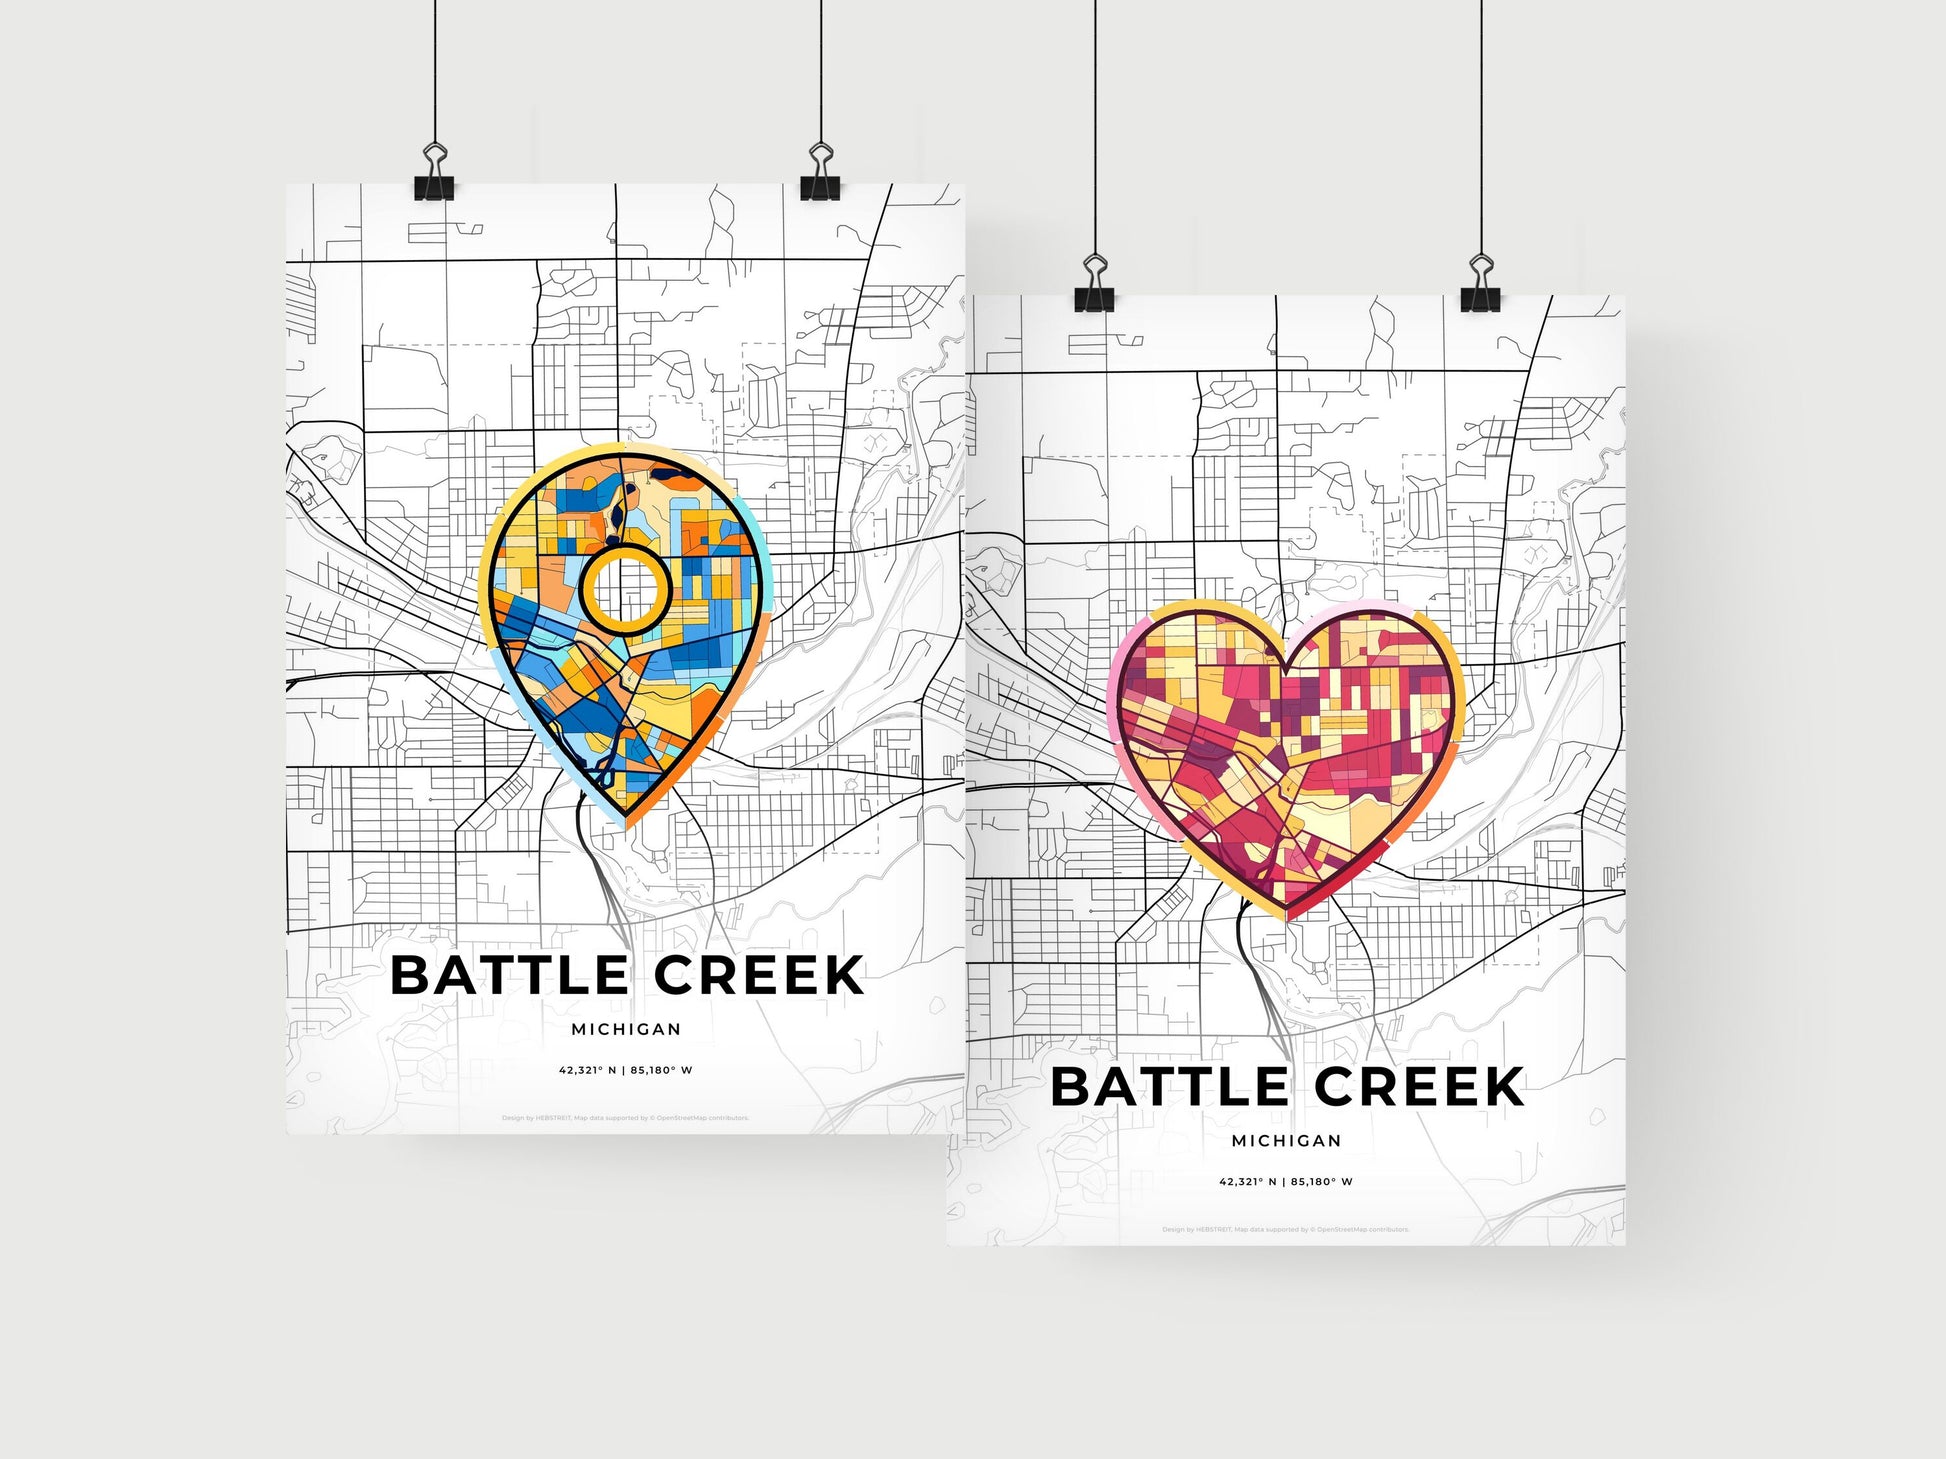 BATTLE CREEK MICHIGAN minimal art map with a colorful icon. Where it all began, Couple map gift.